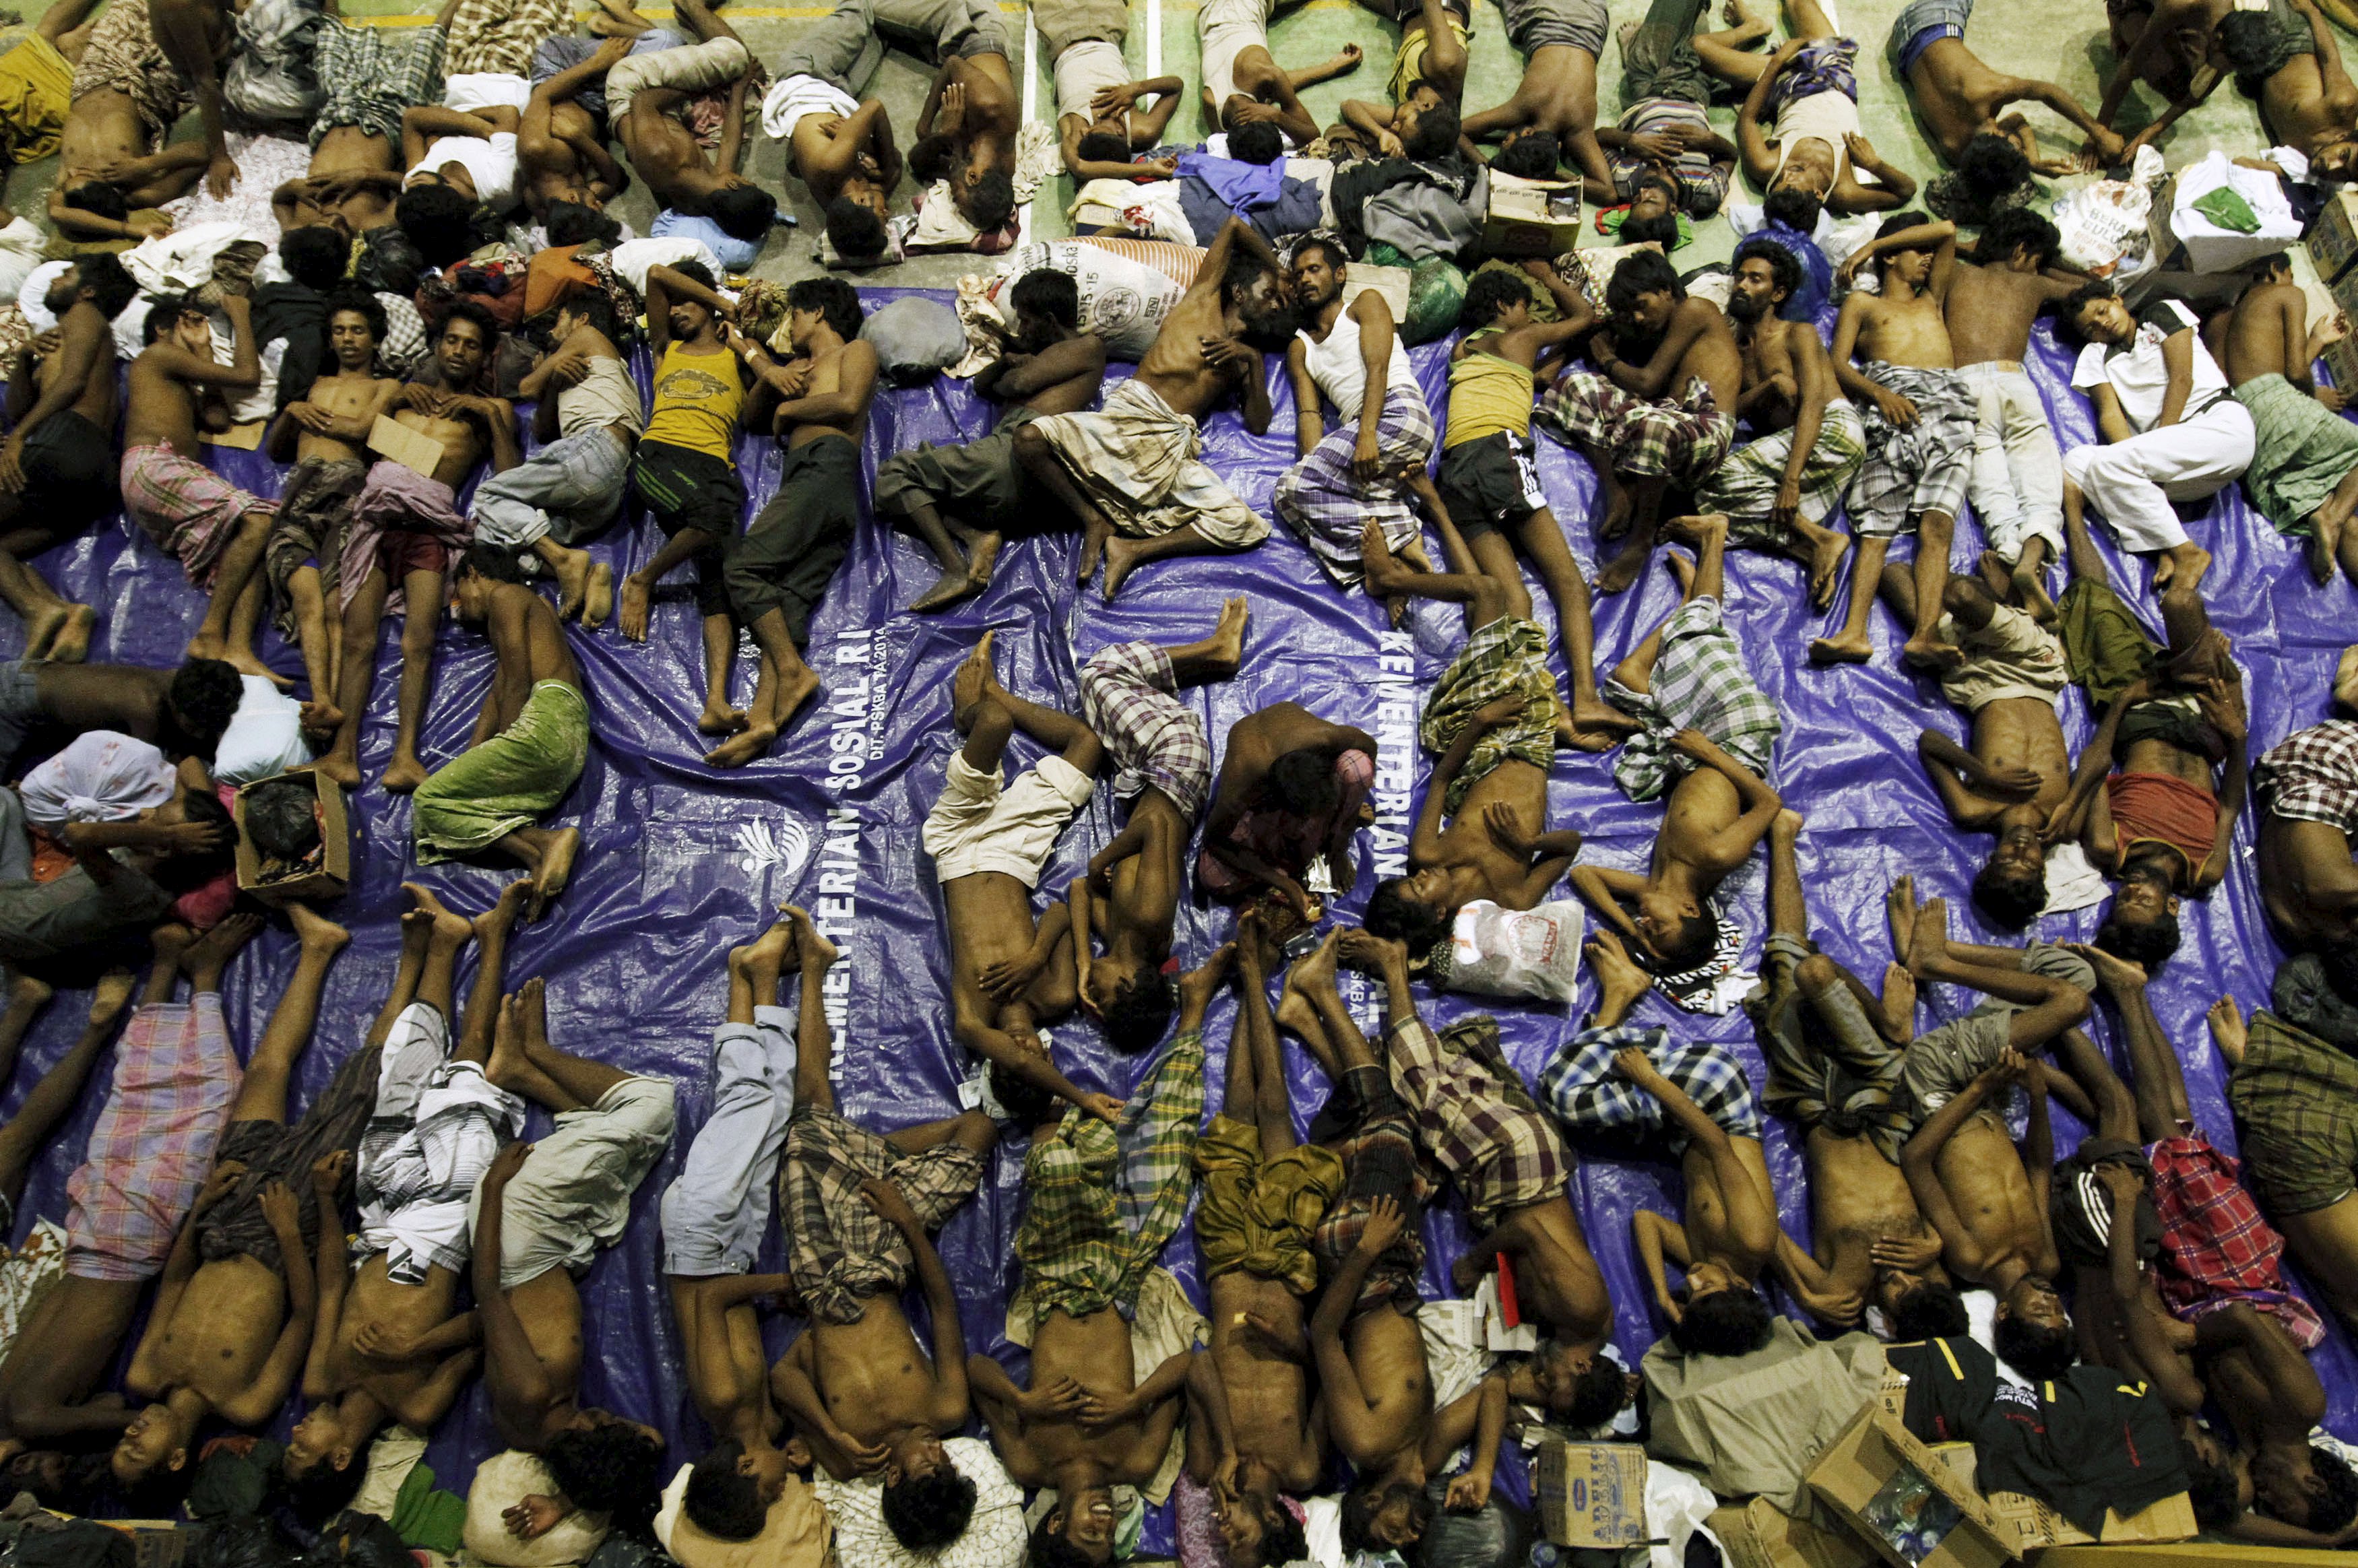 Migrants believed to be Rohingya rest inside a shelter after being rescued from boats at Lhoksukon in Indonesia's Aceh Province. Tens of thousands of Rohingya have fled Myanmar in the face of state-sanctioned discrimination.